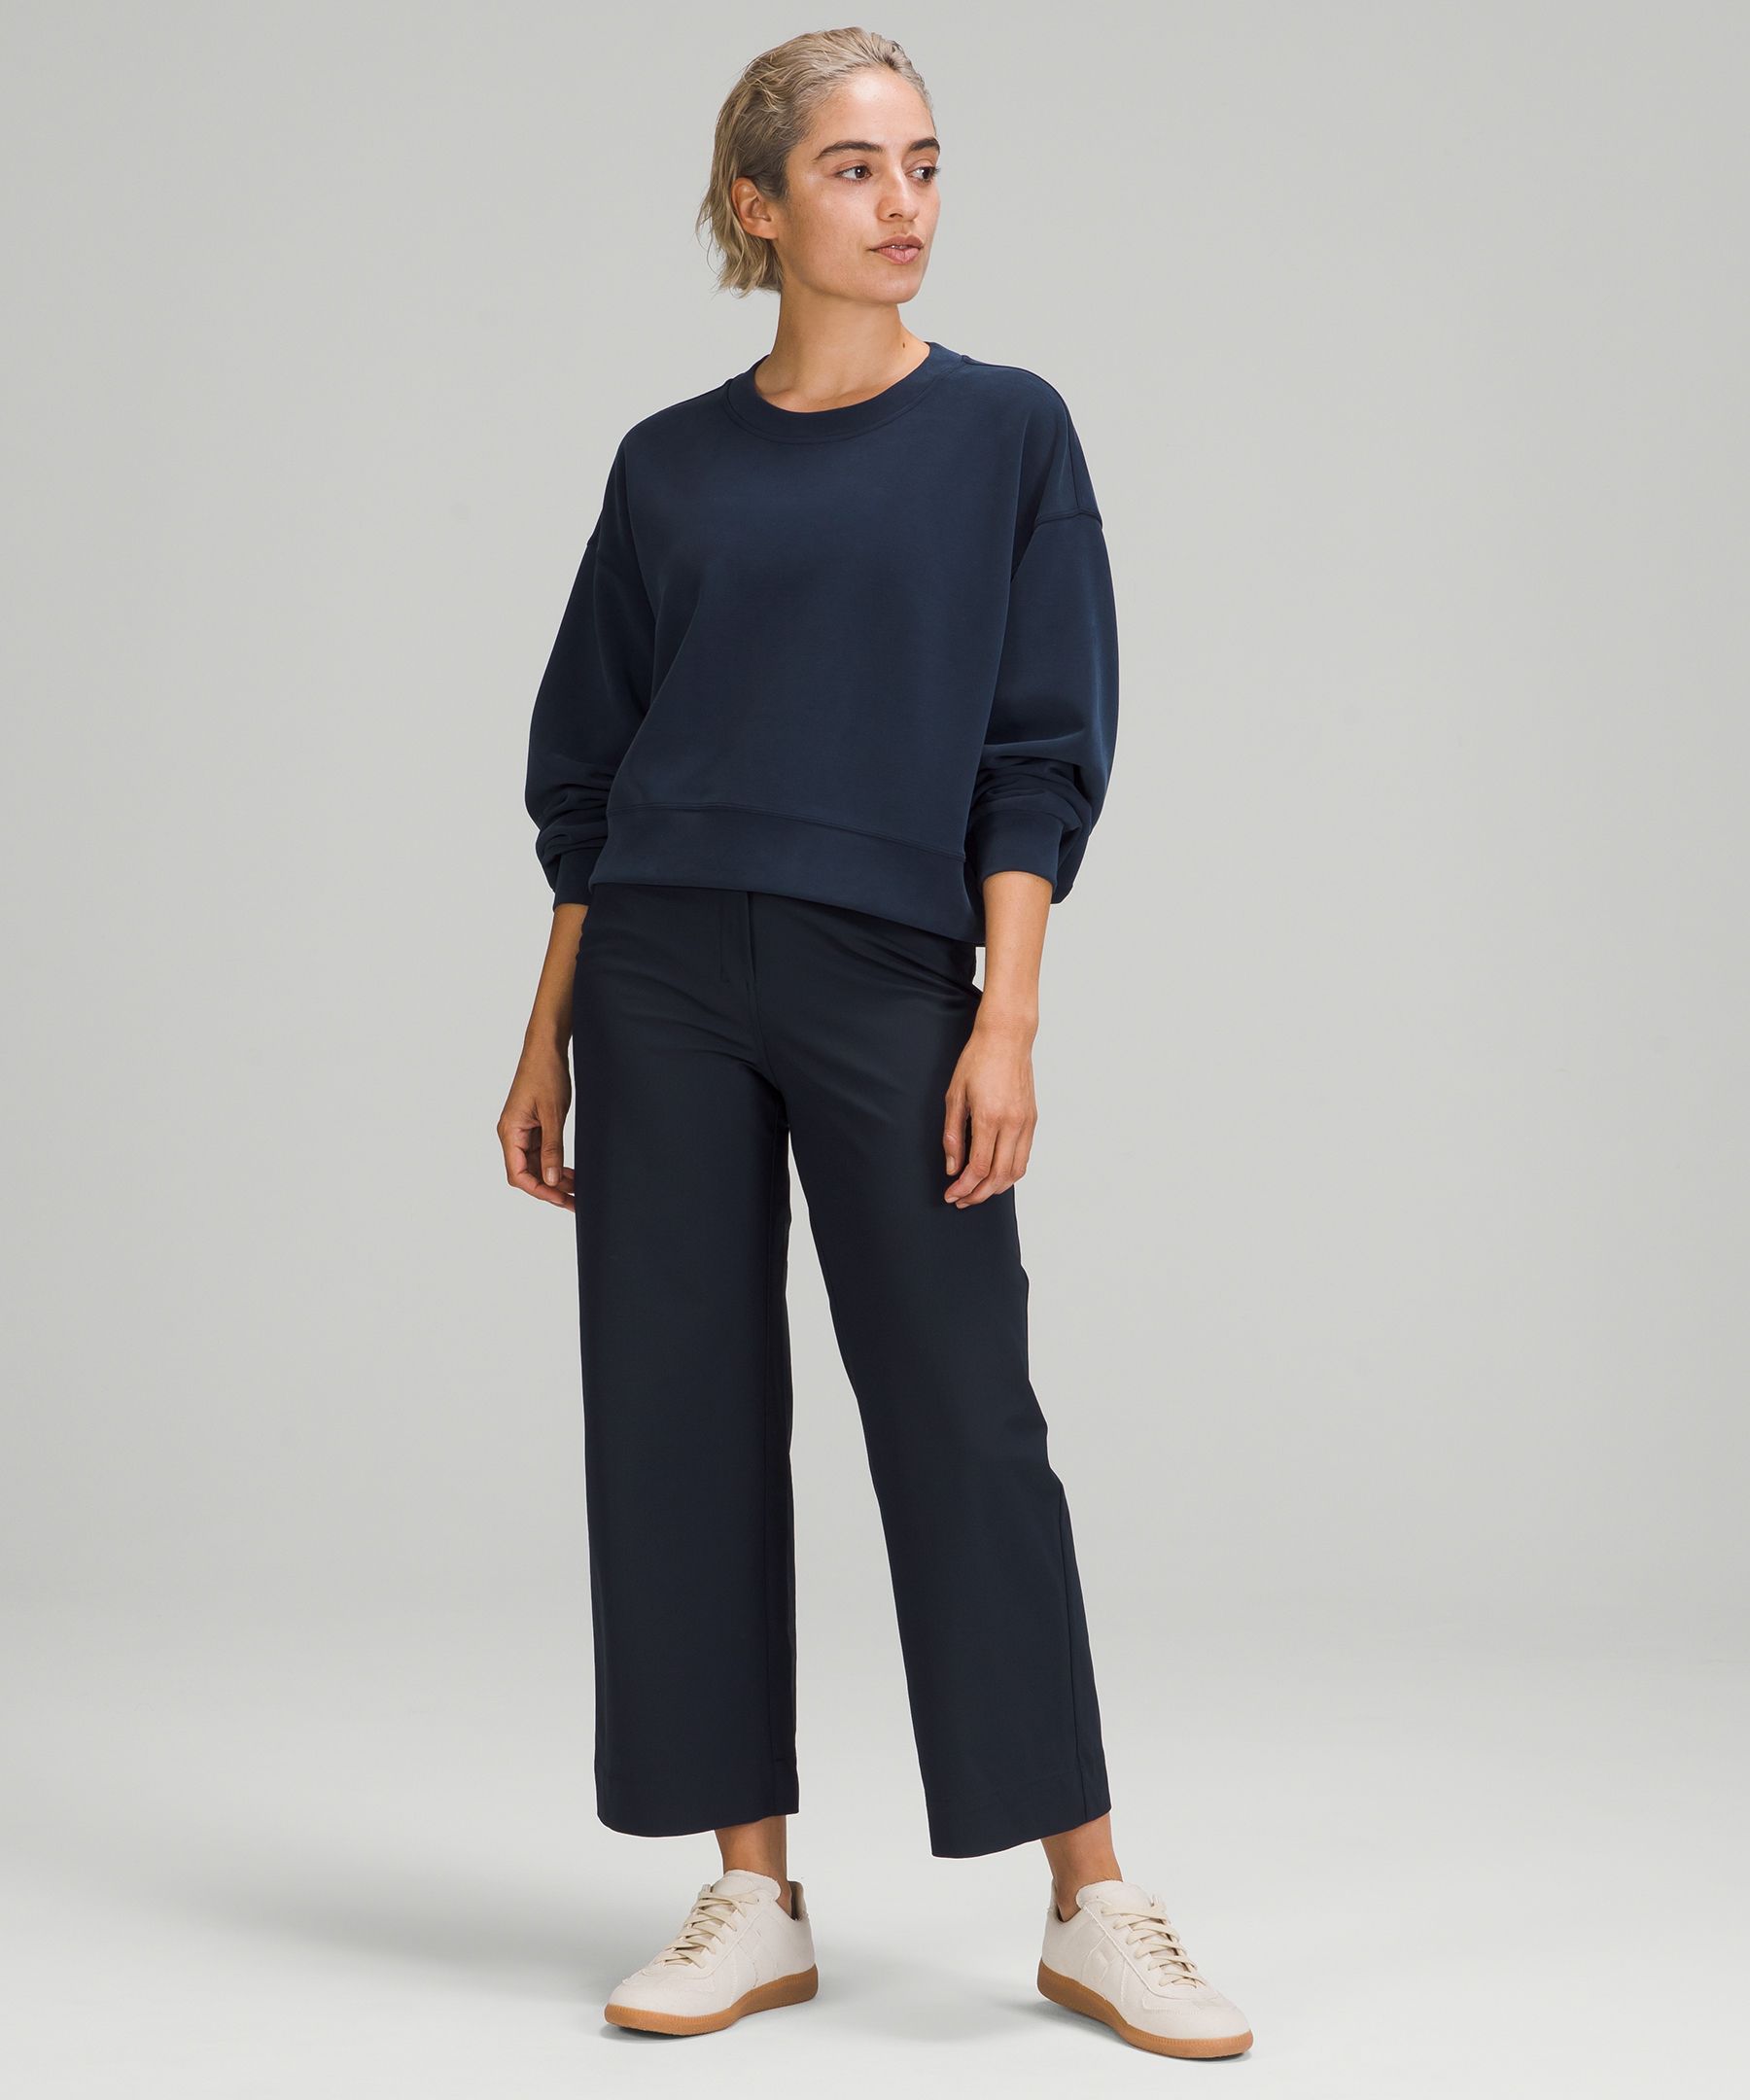 Didn't expect to love this so much - City Sleek 5 Pocket Wide-Leg